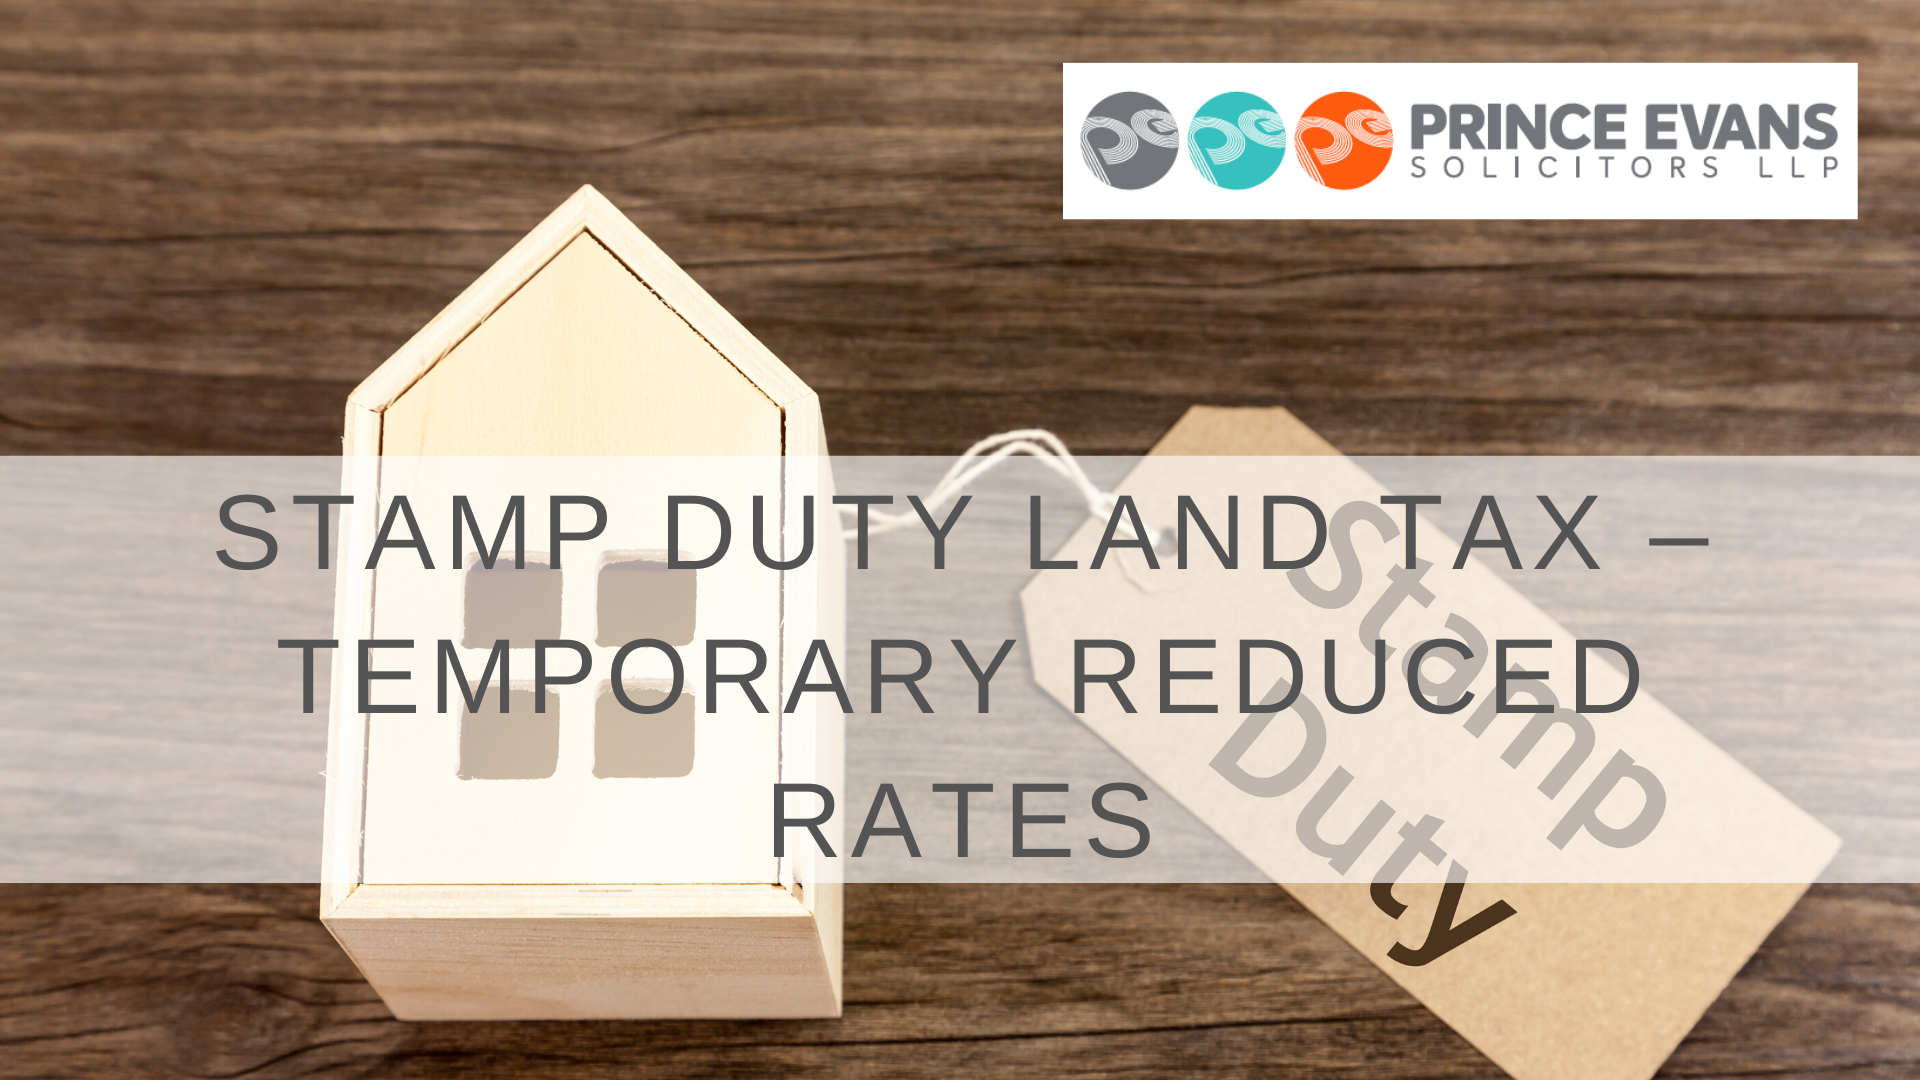 STAMP DUTY LAND TAX – TEMPORARY REDUCED RATES  Prince Evans Solicitors LLP